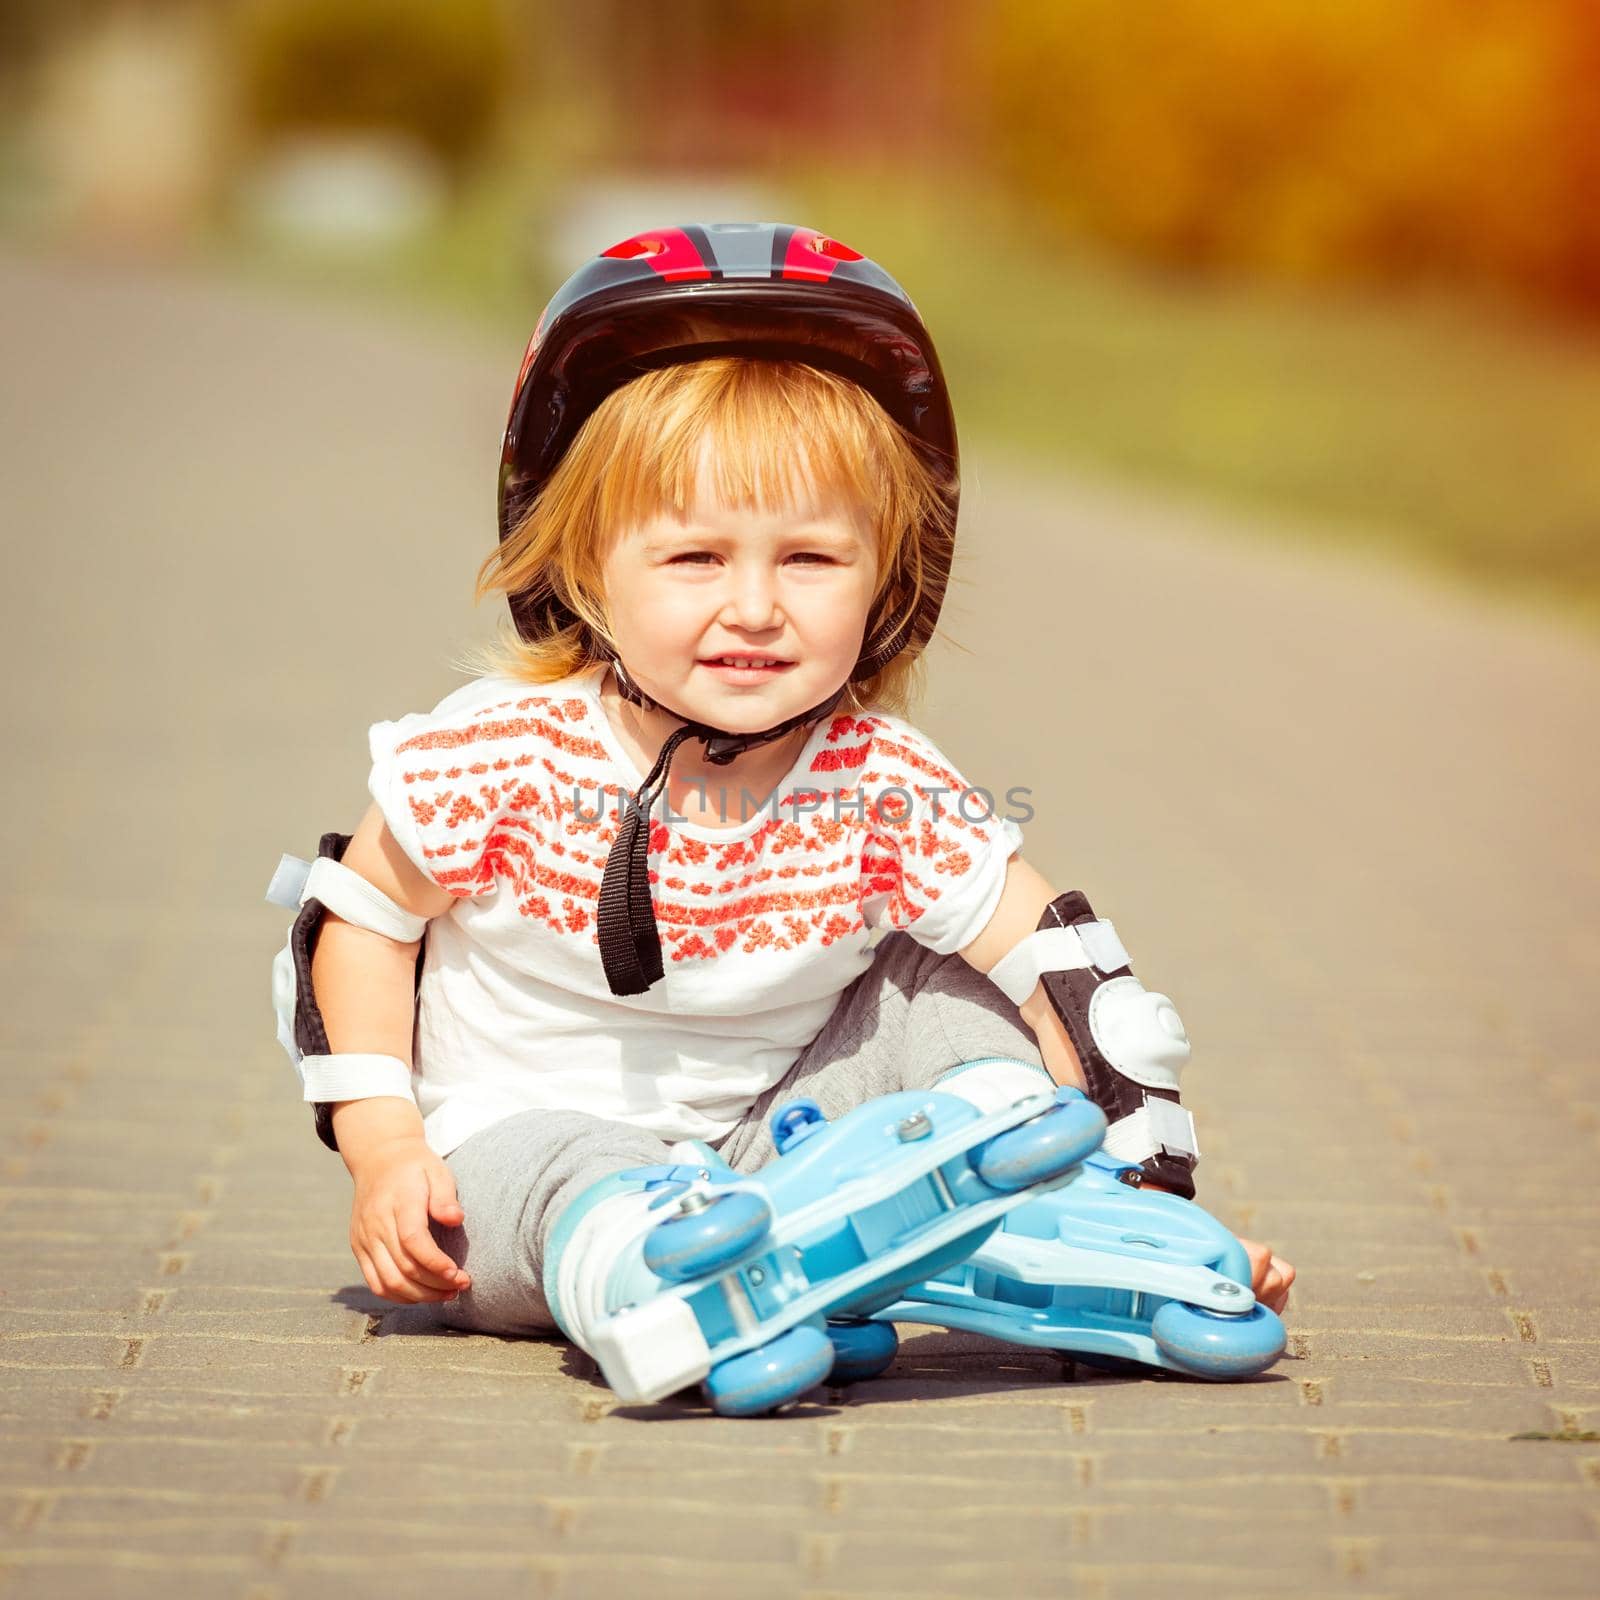 two year old girl in roller skates and a helmet by tan4ikk1